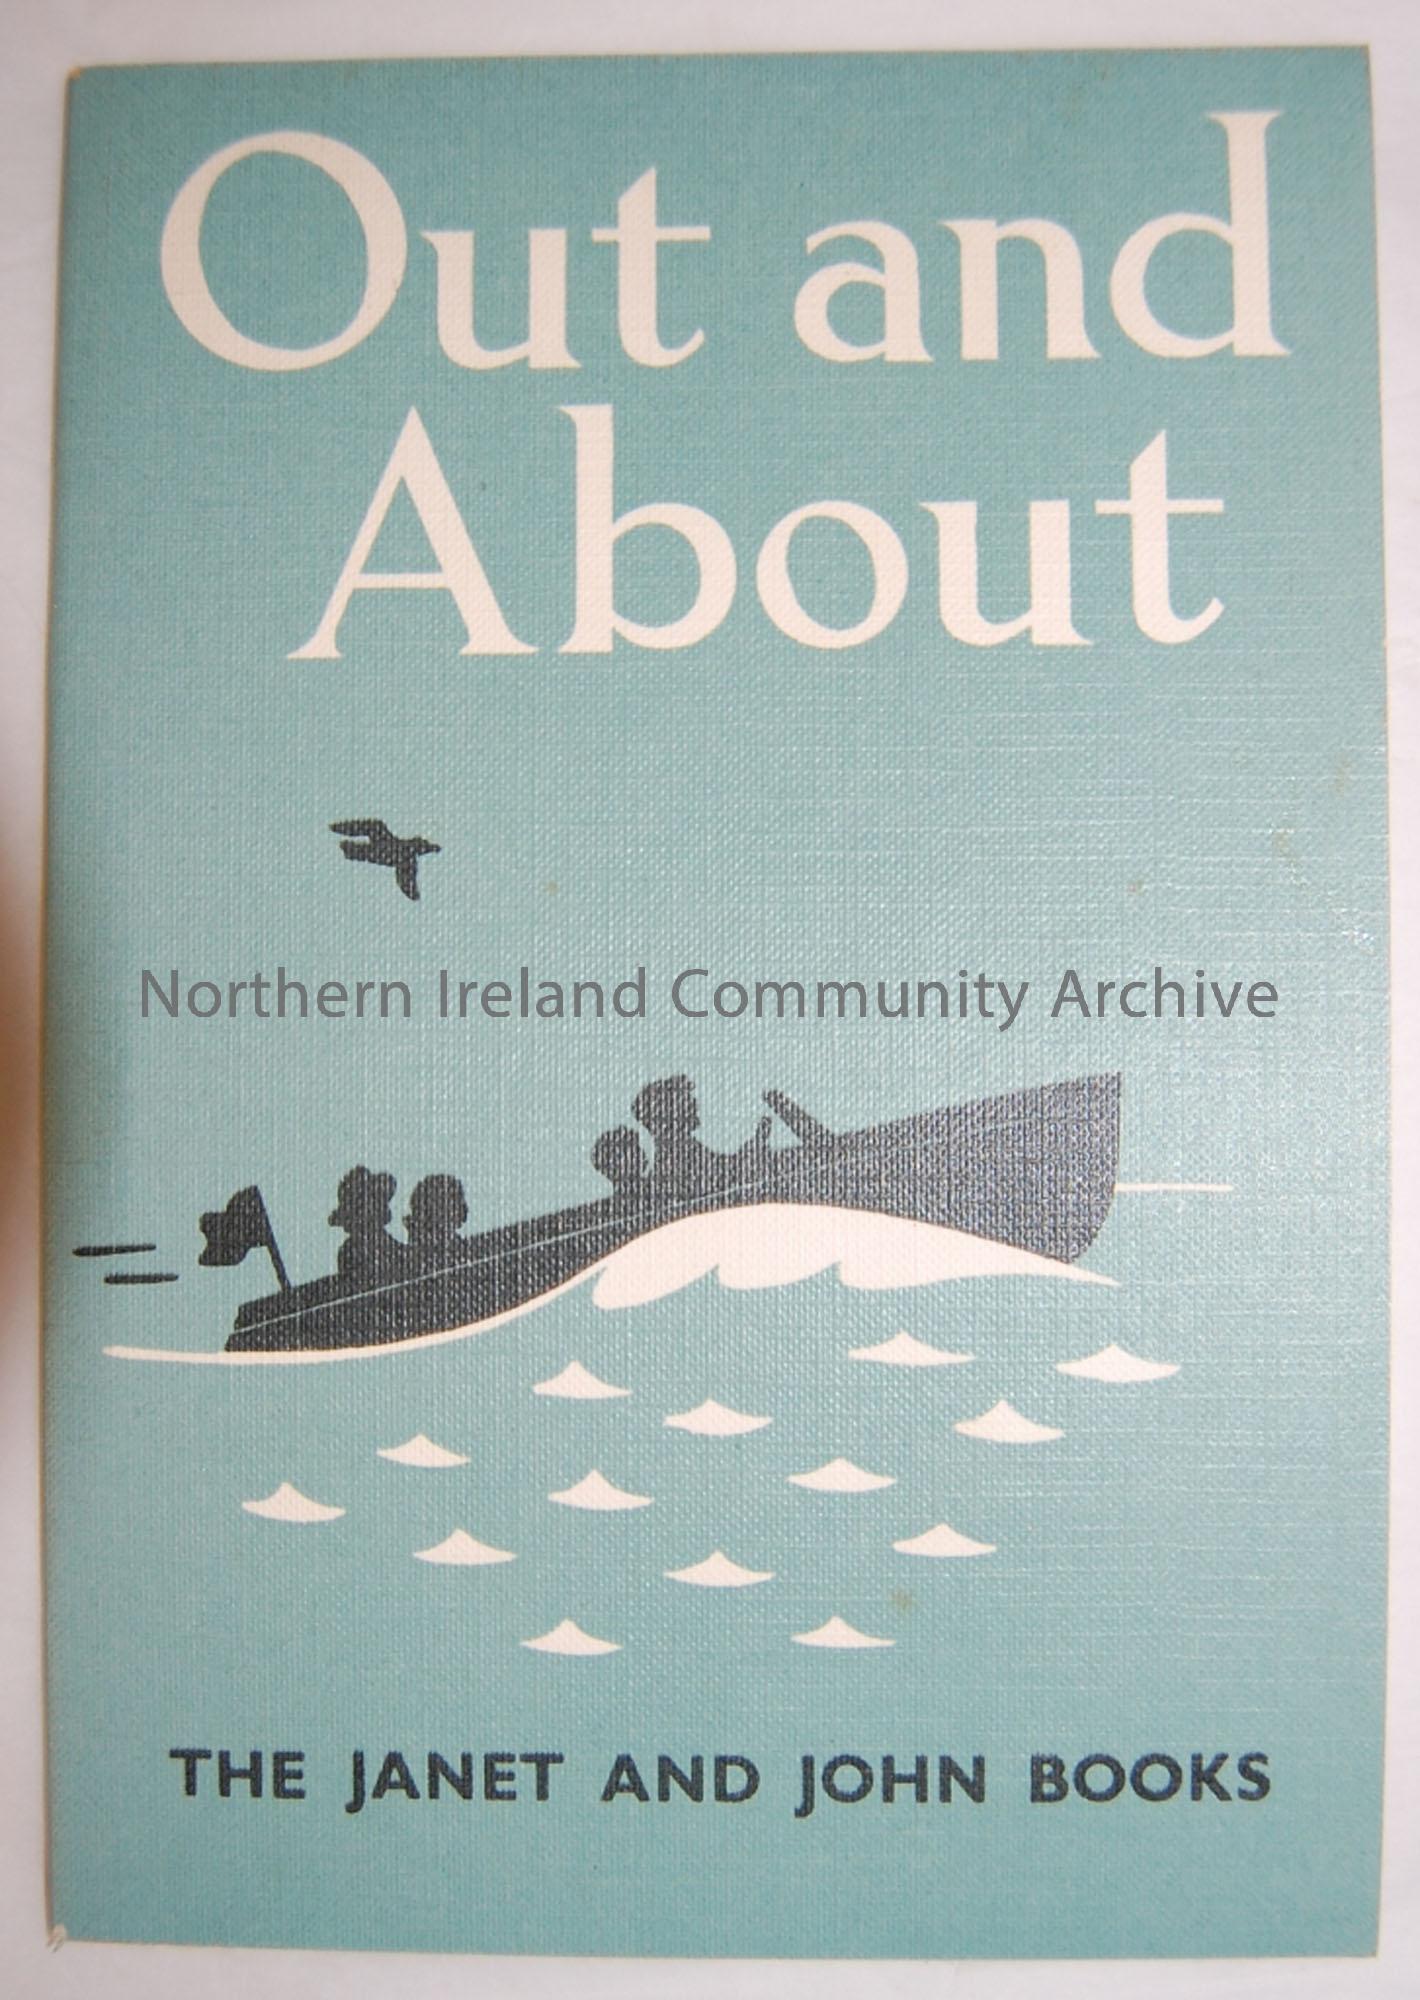 By O’Donnell and Munro, published by Nisbet & Co. Ltd, 1949. Turquoise cover.